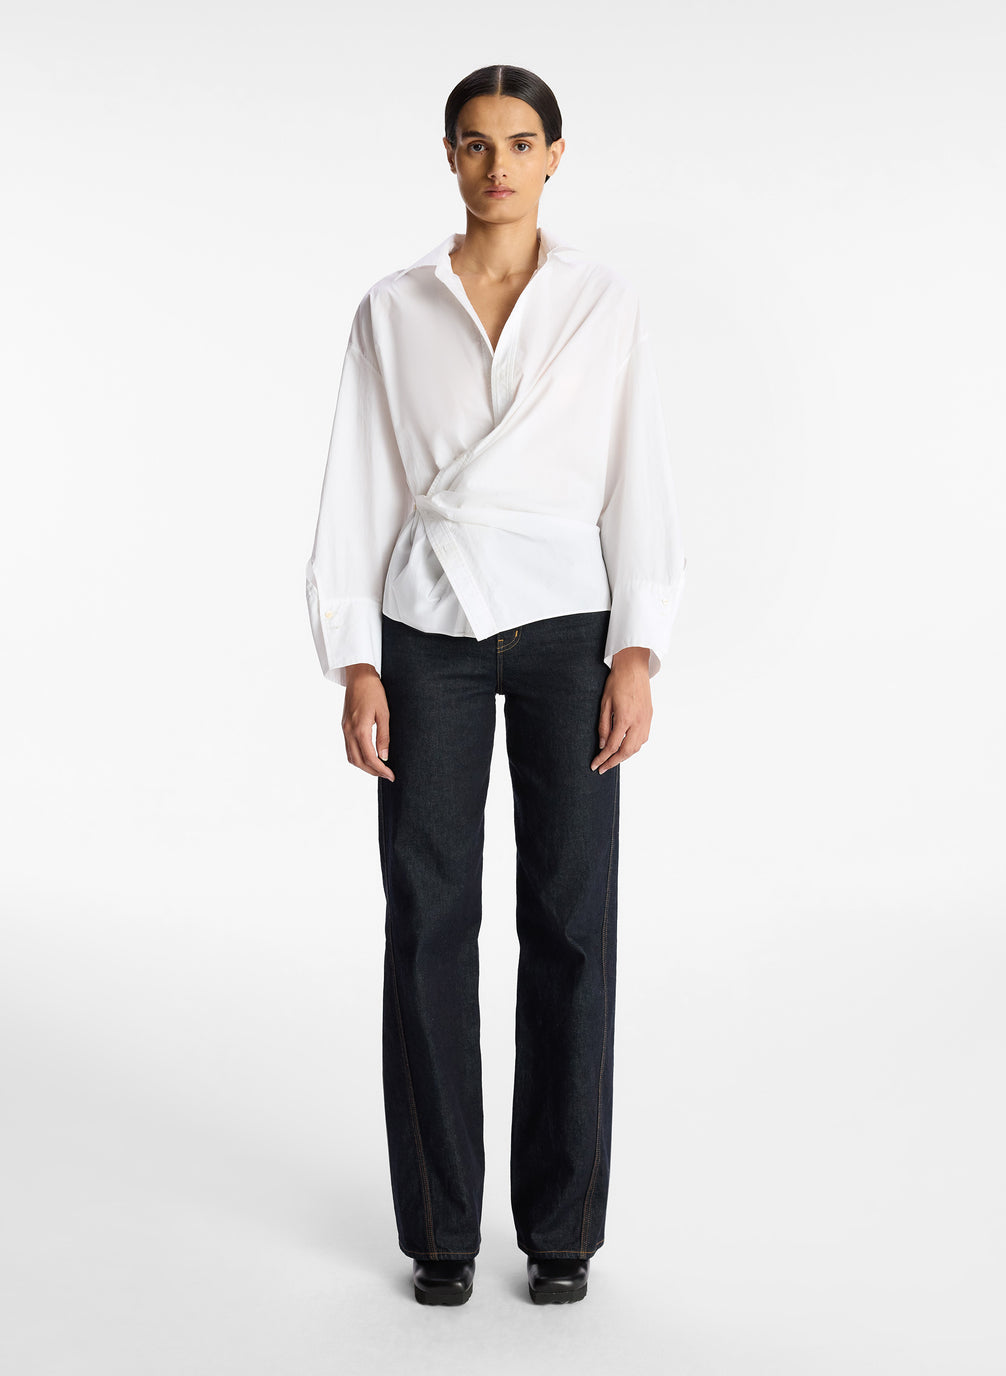 front view of woman wearing white collared cotton wrap top and dark wash denim jeans